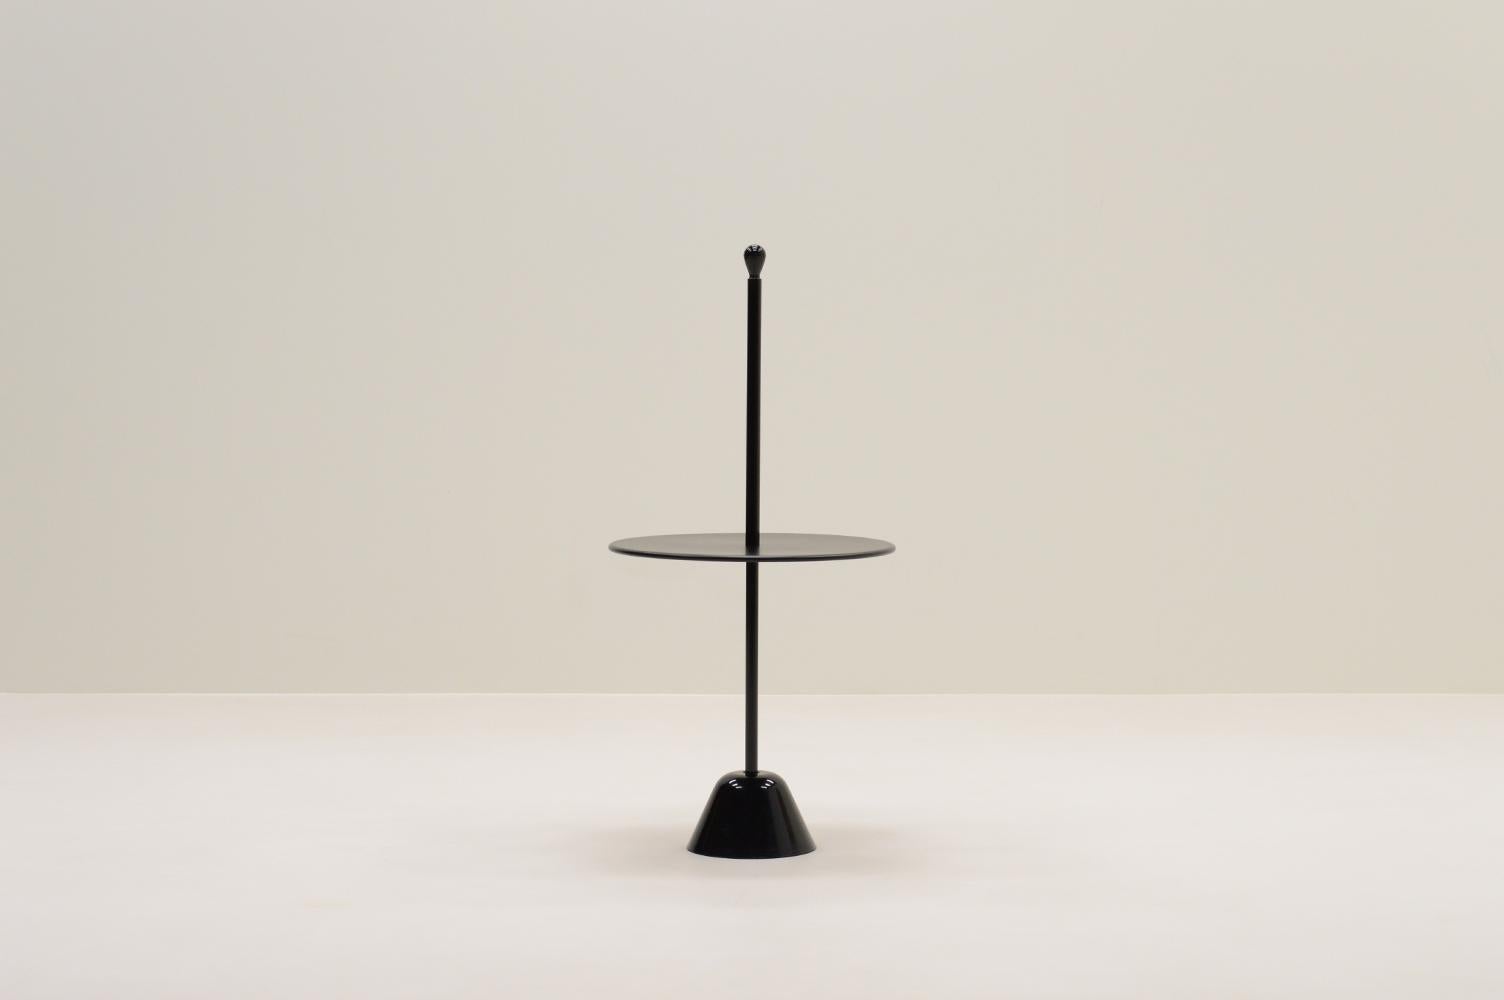 Cervomuto side table by Achille Castiglioni for Zanottta, 1970s Italy. A combination of a polypropylene base, steel column and wooden top, all finished in black. The Servomuto was designed for the Servi range by Achille Pier Giacomo Castiglioni in